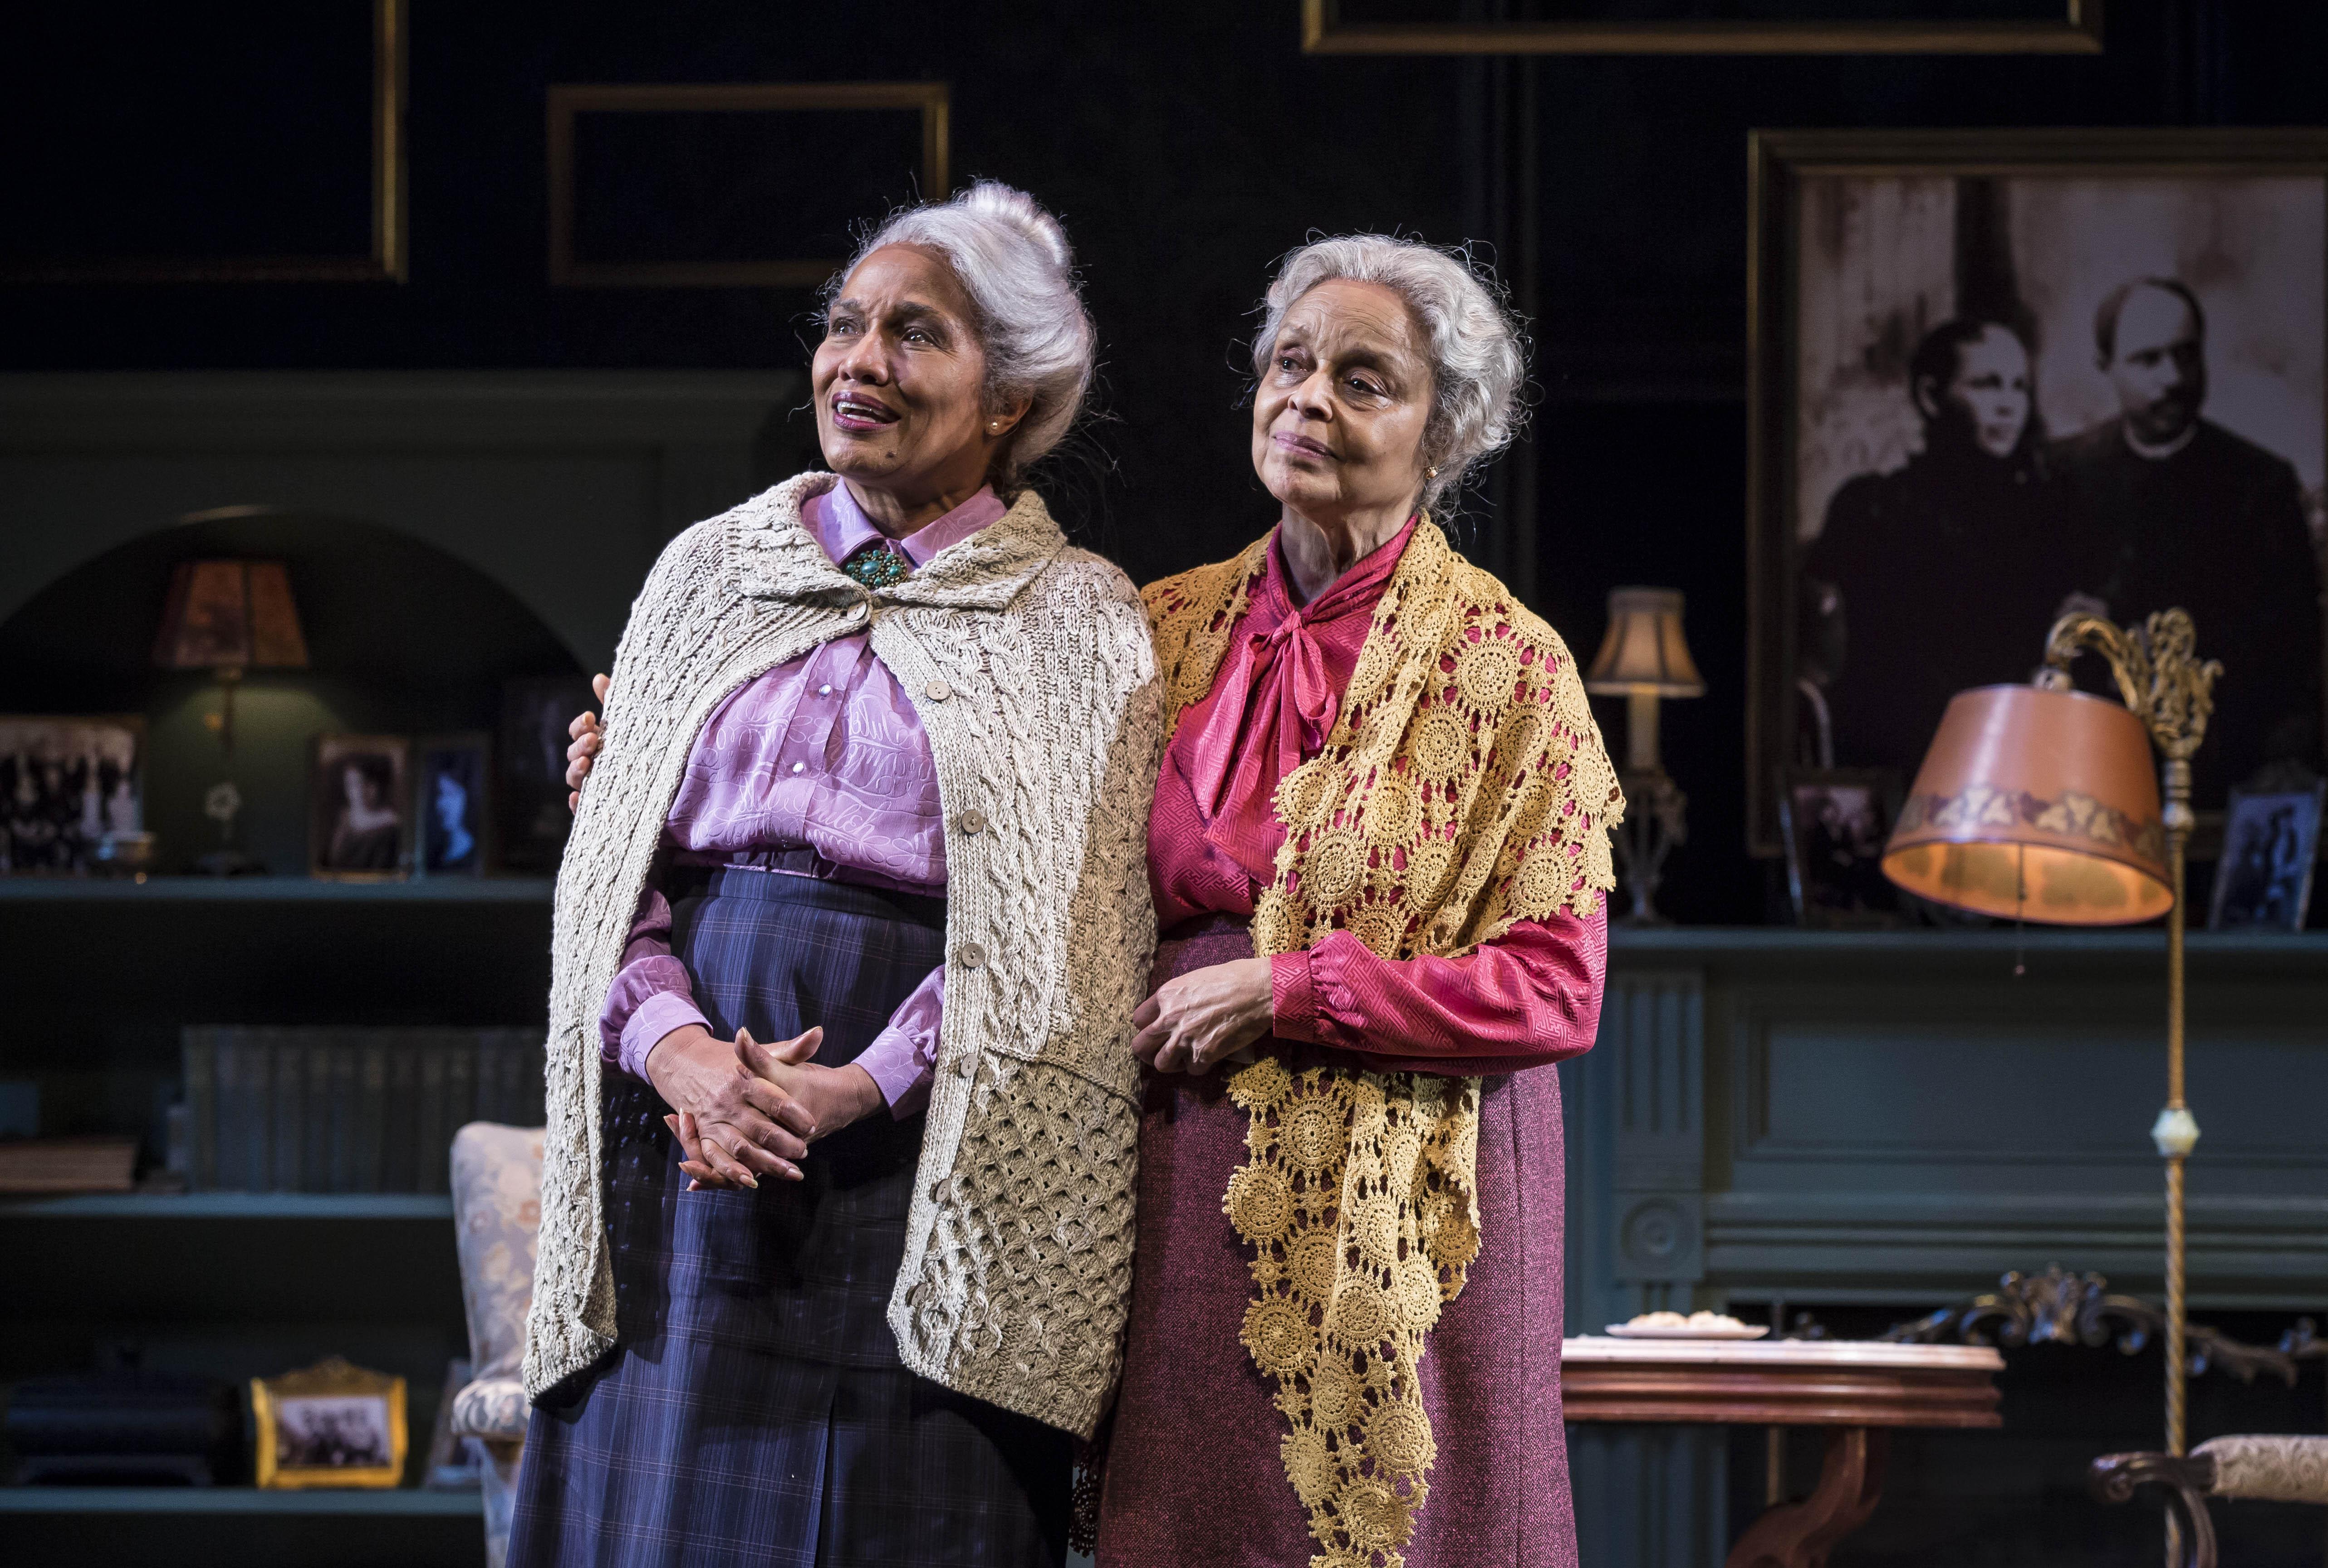 Ella Joyce and Marie Thomas in Chuck Smith’s major revival of Emily Mann’s “Having Our Say: The Delany Sisters’ First 100 Years” at Goodman Theatre, May 5-June 10. (Photo credit: Liz Lauren)